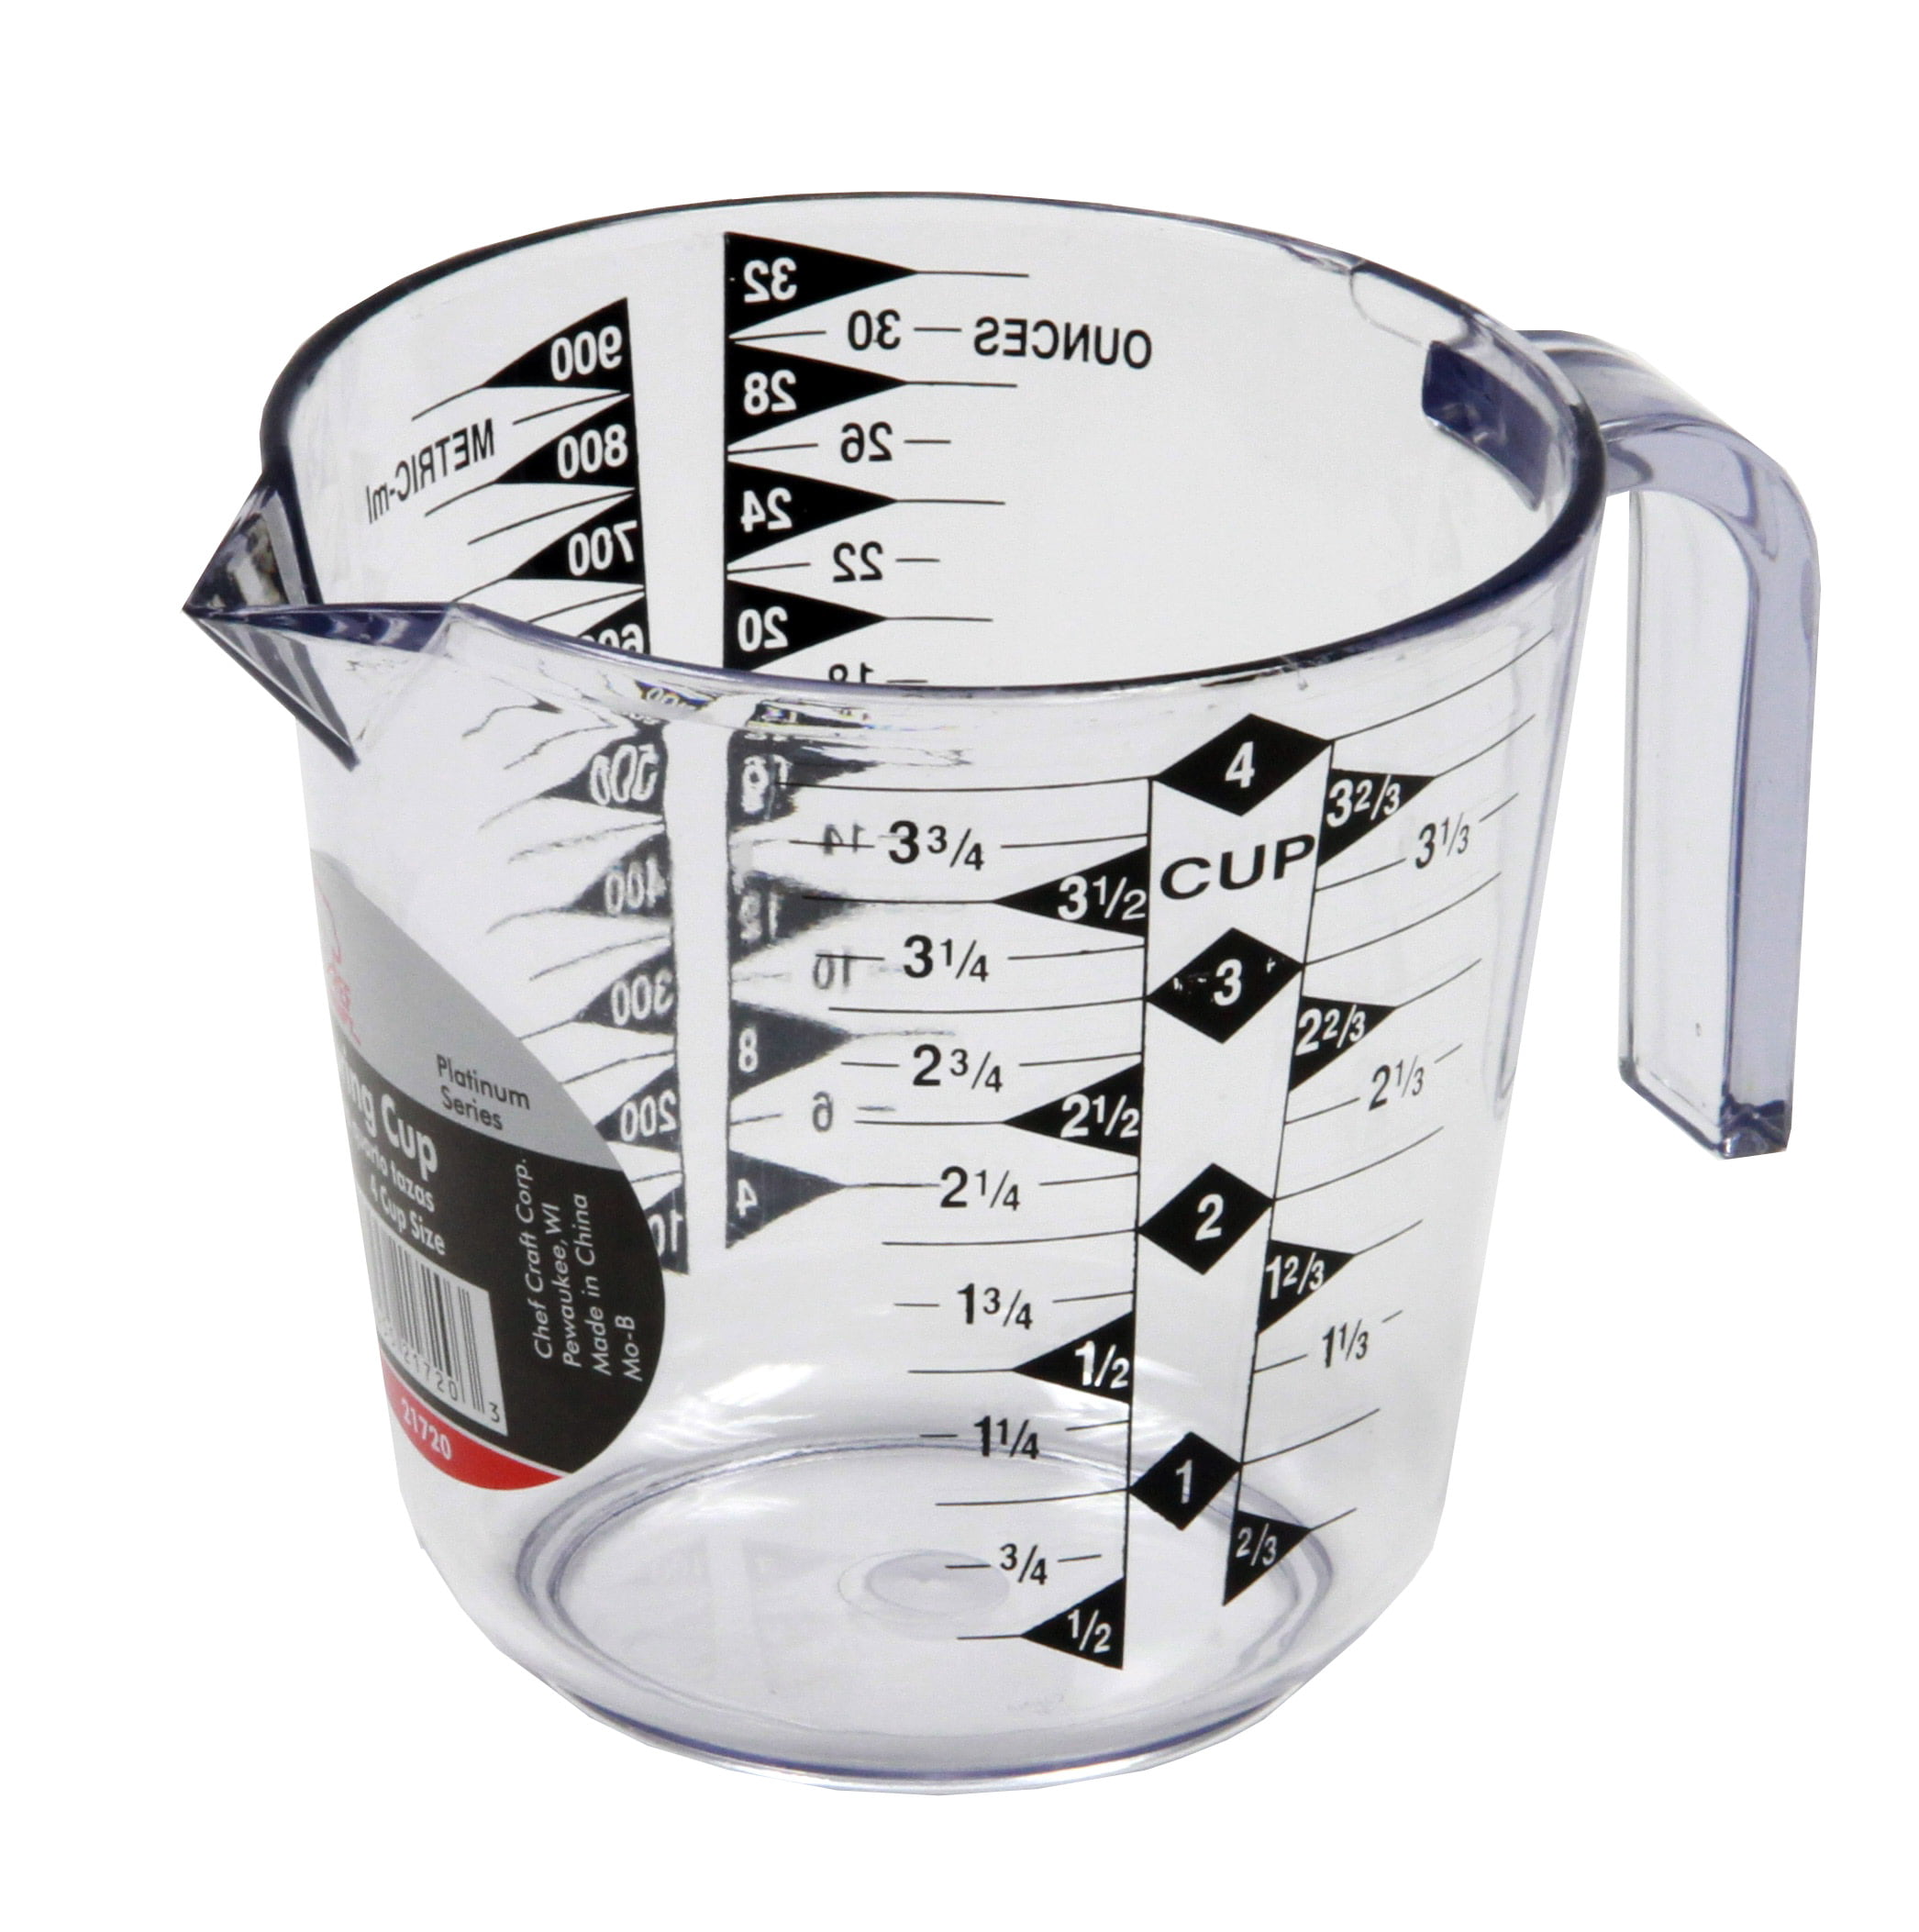 Pampered Chef - A happy customer in Wausau, WI calls the Measure-All Cup  the best measuring tool around. Get one FREE with any $75 purchase this  month. See details at checkout!